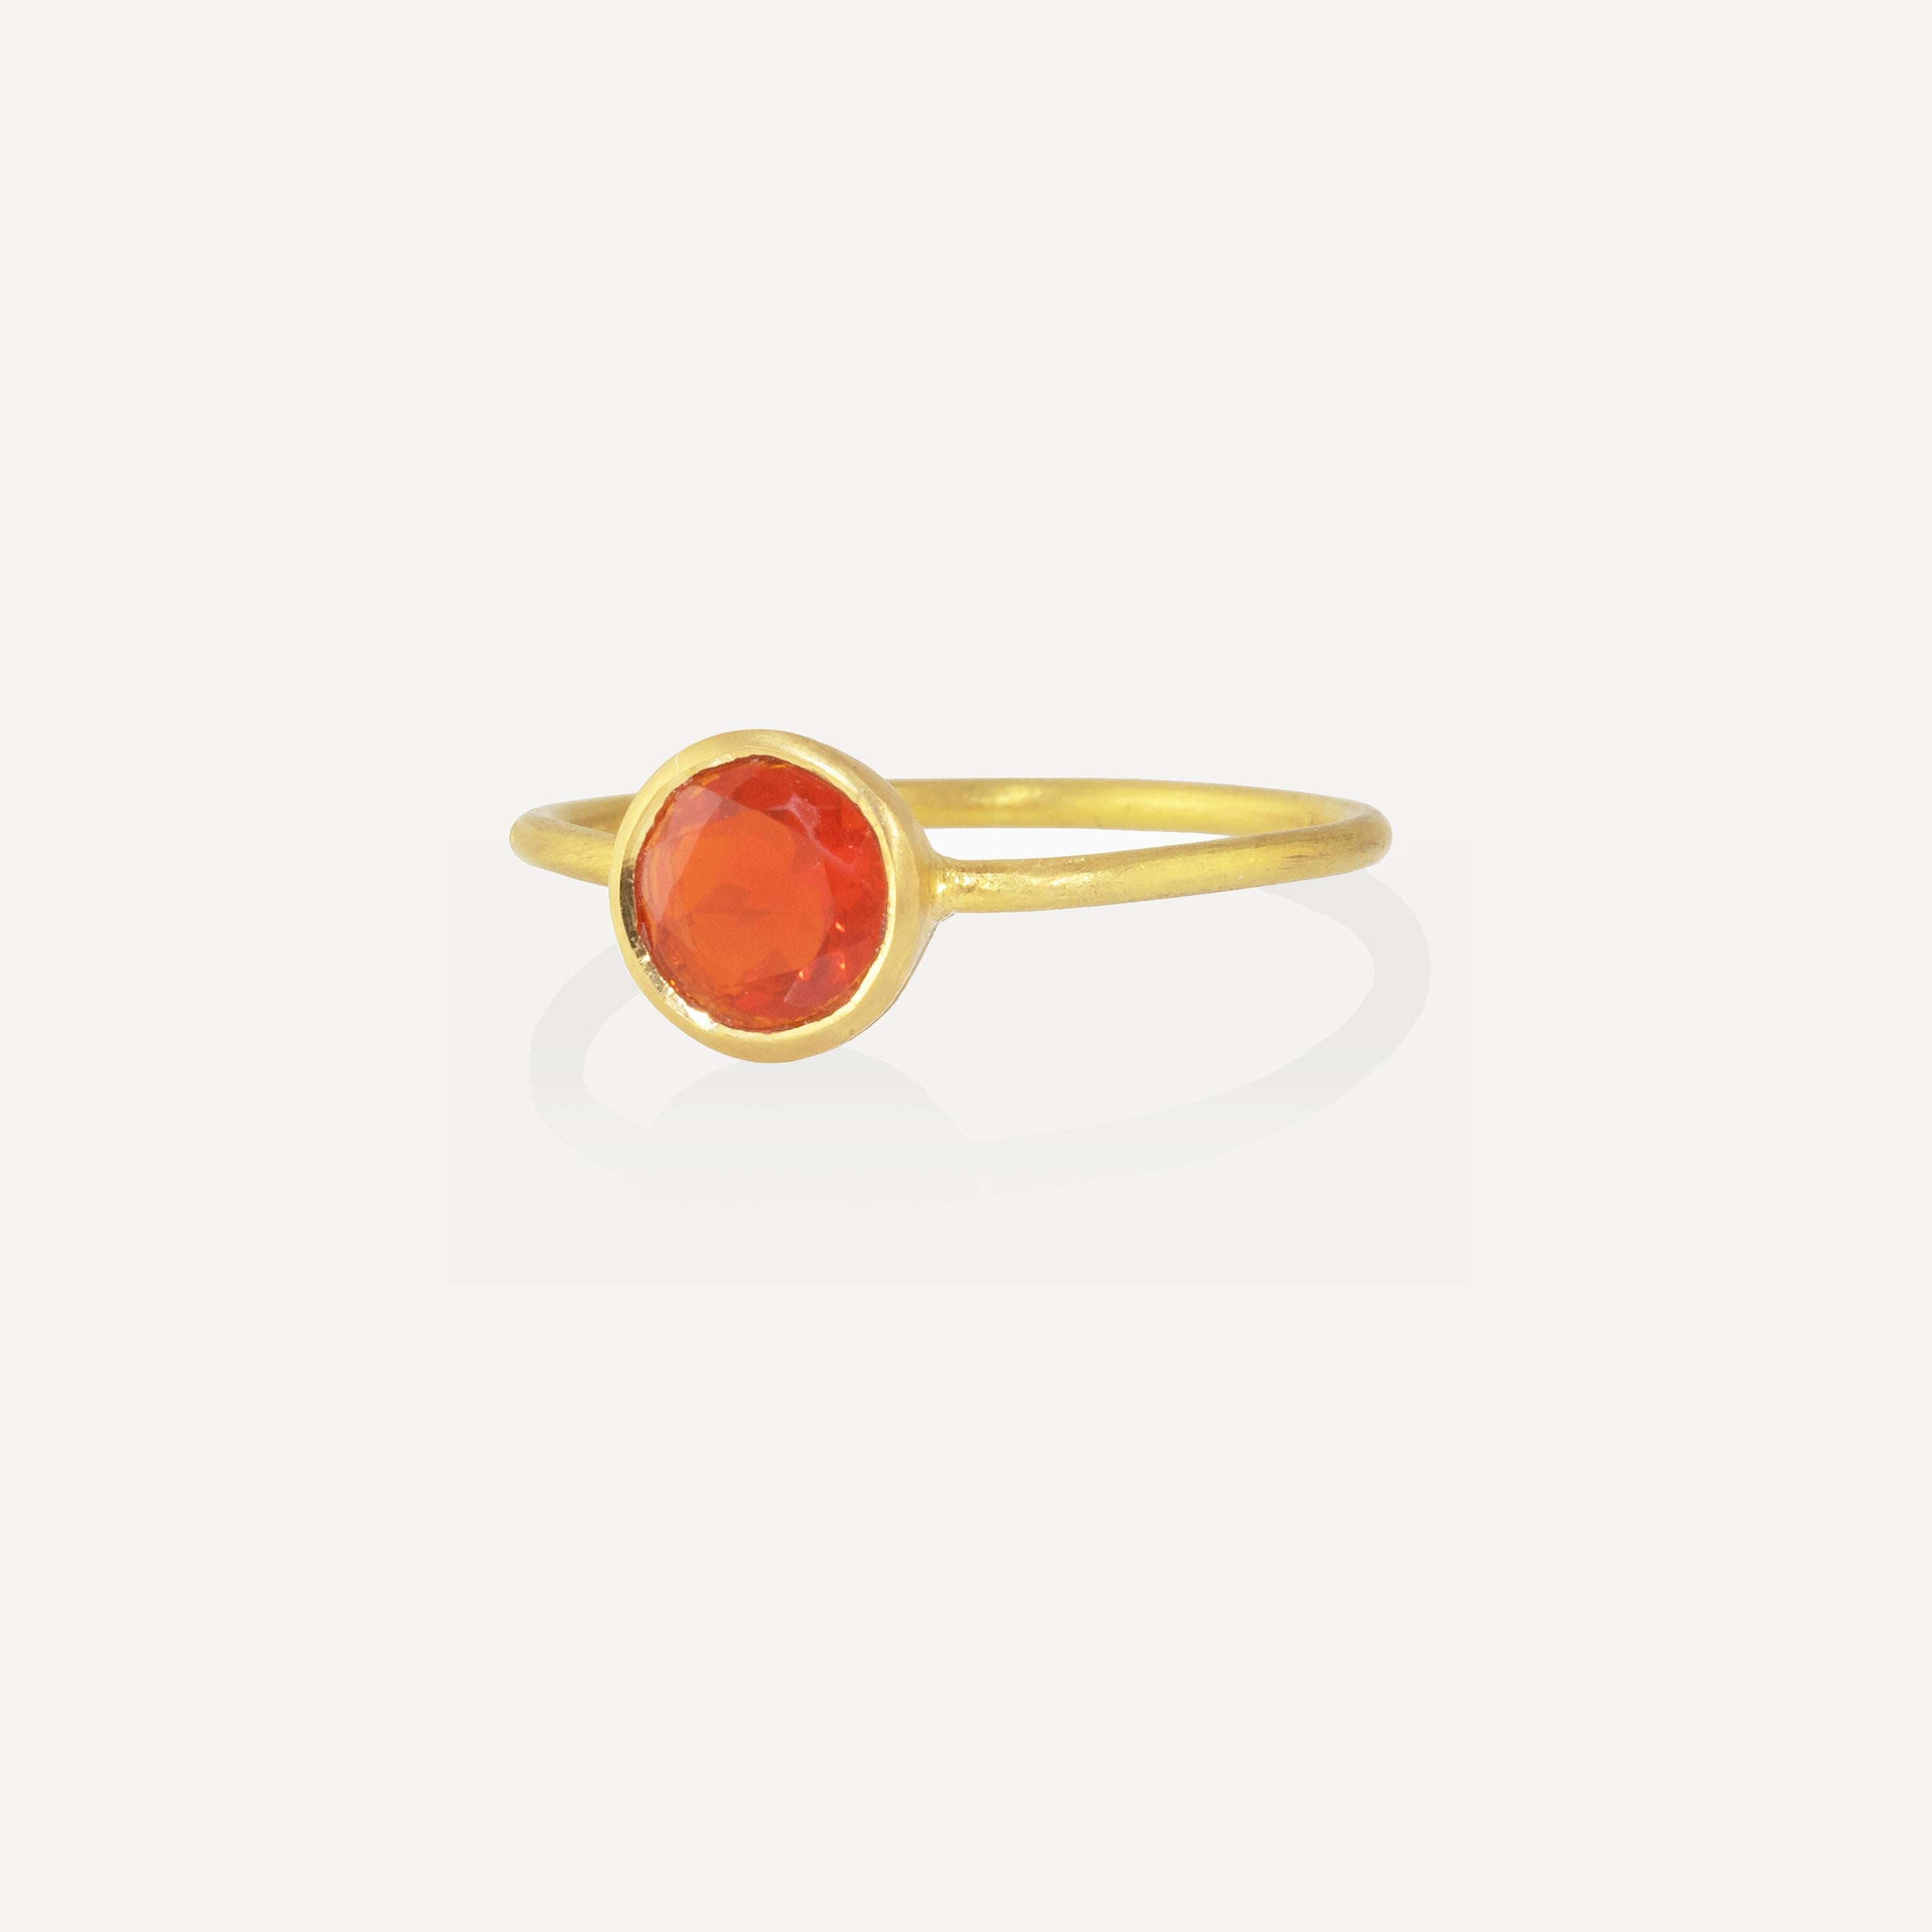 The 22k gold ring features a bright orange 6mm Fire Opal. Wear this alone or in combination with other rings for a pop of color. 

Mexican Fire Opal has been prized since ancient times, as symbols of the deepest and strongest love. However, the